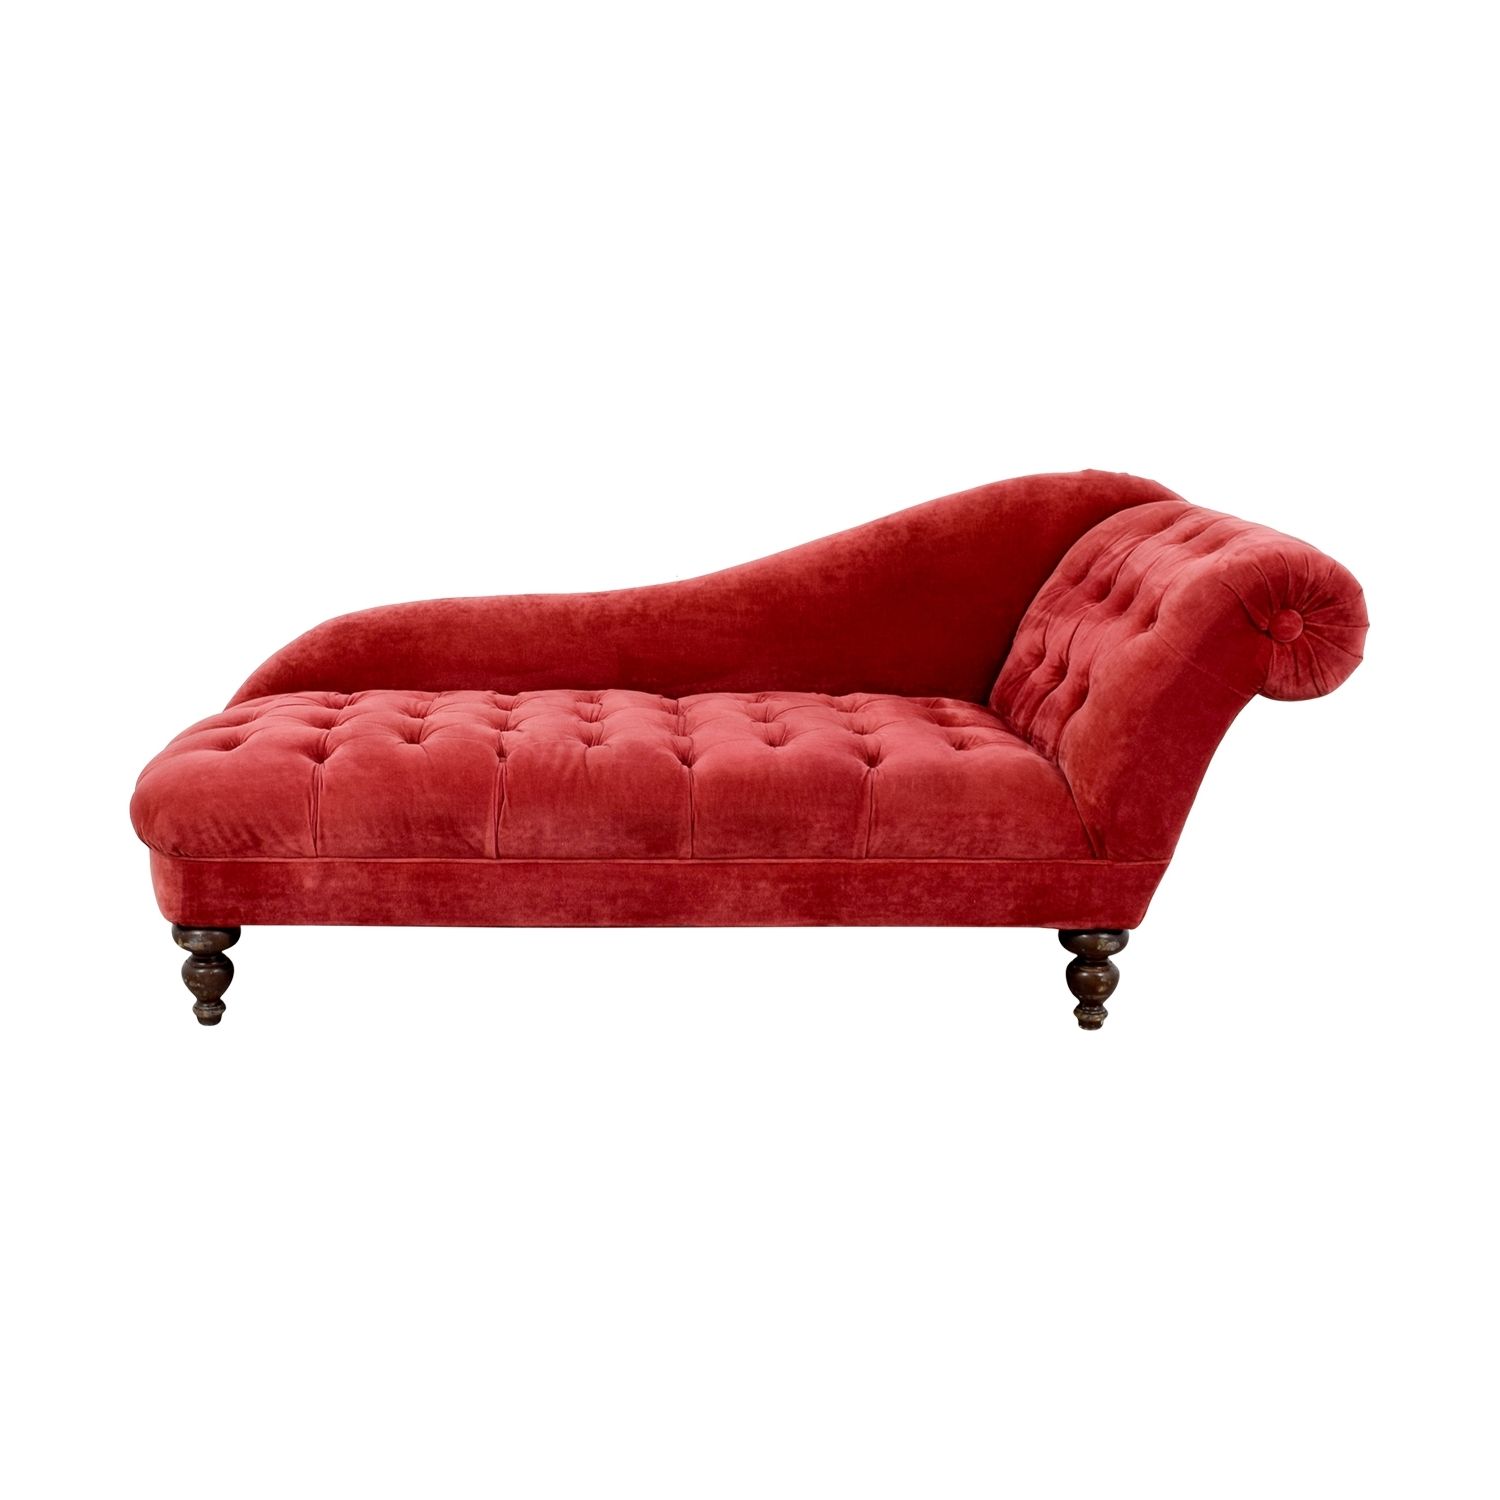 [%71% Off – Domain Home Furnishings Domain Home Furnishings Red In Most Recently Released Red Chaises|red Chaises Throughout 2018 71% Off – Domain Home Furnishings Domain Home Furnishings Red|well Known Red Chaises Within 71% Off – Domain Home Furnishings Domain Home Furnishings Red|most Up To Date 71% Off – Domain Home Furnishings Domain Home Furnishings Red Throughout Red Chaises%] (View 4 of 15)